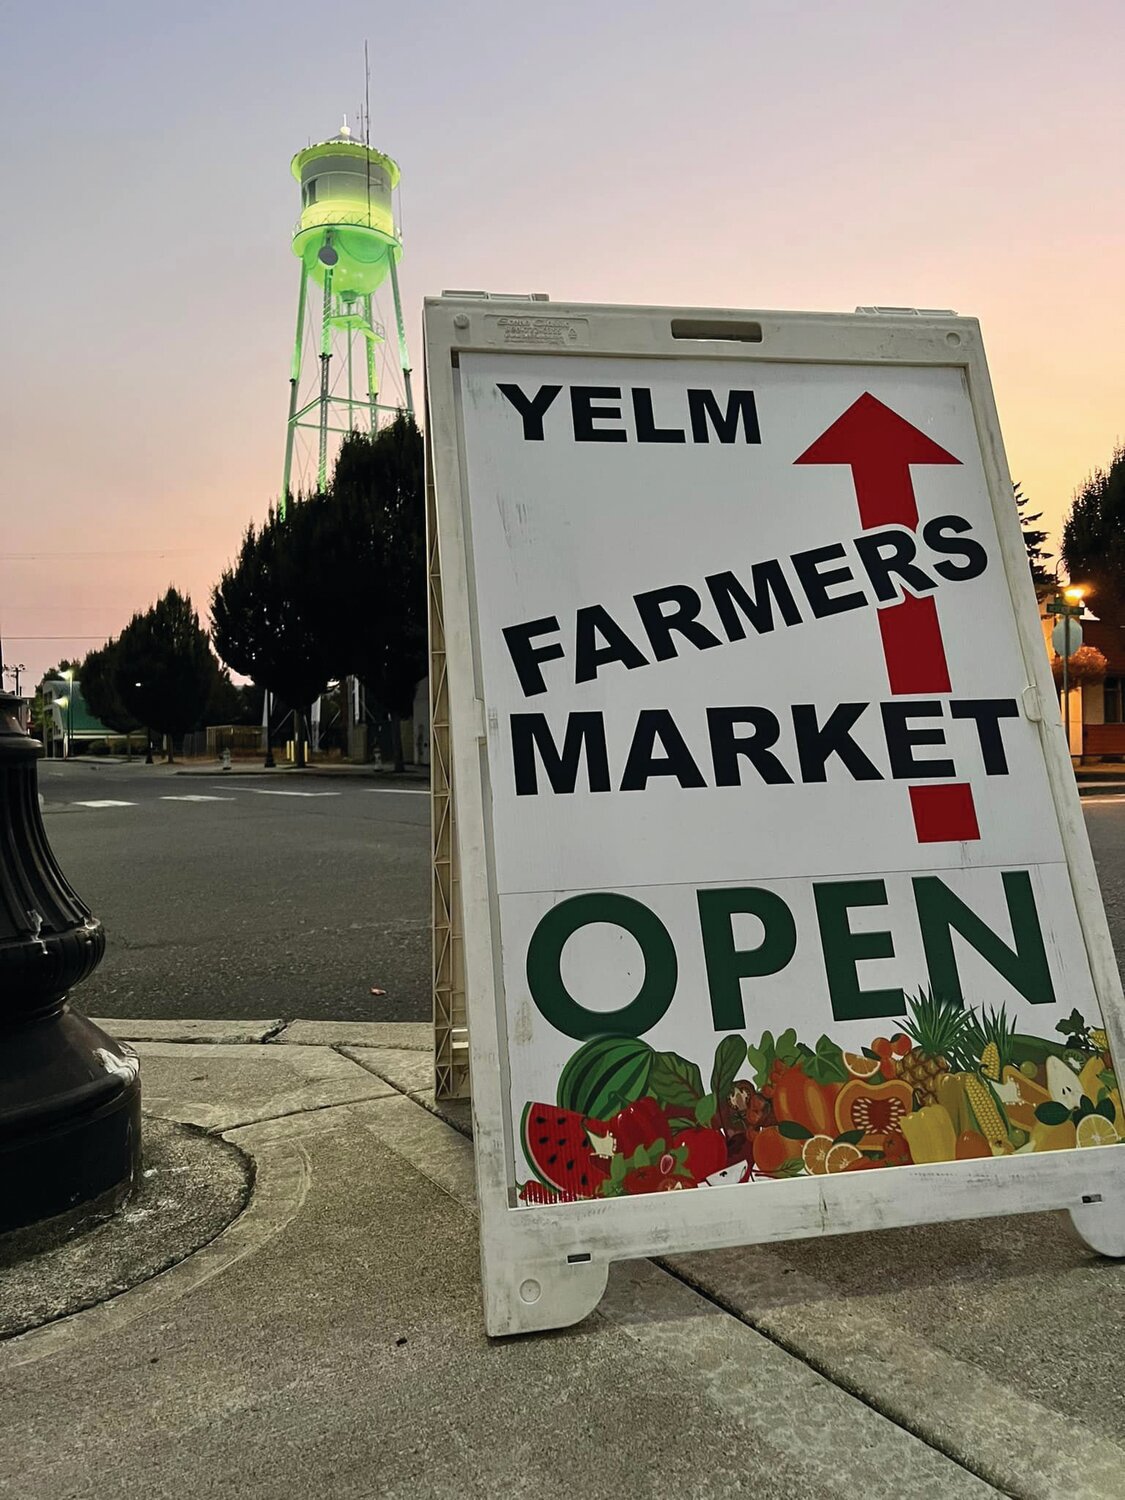 The Yelm Farmers Market concluded for the season on Sept. 30.